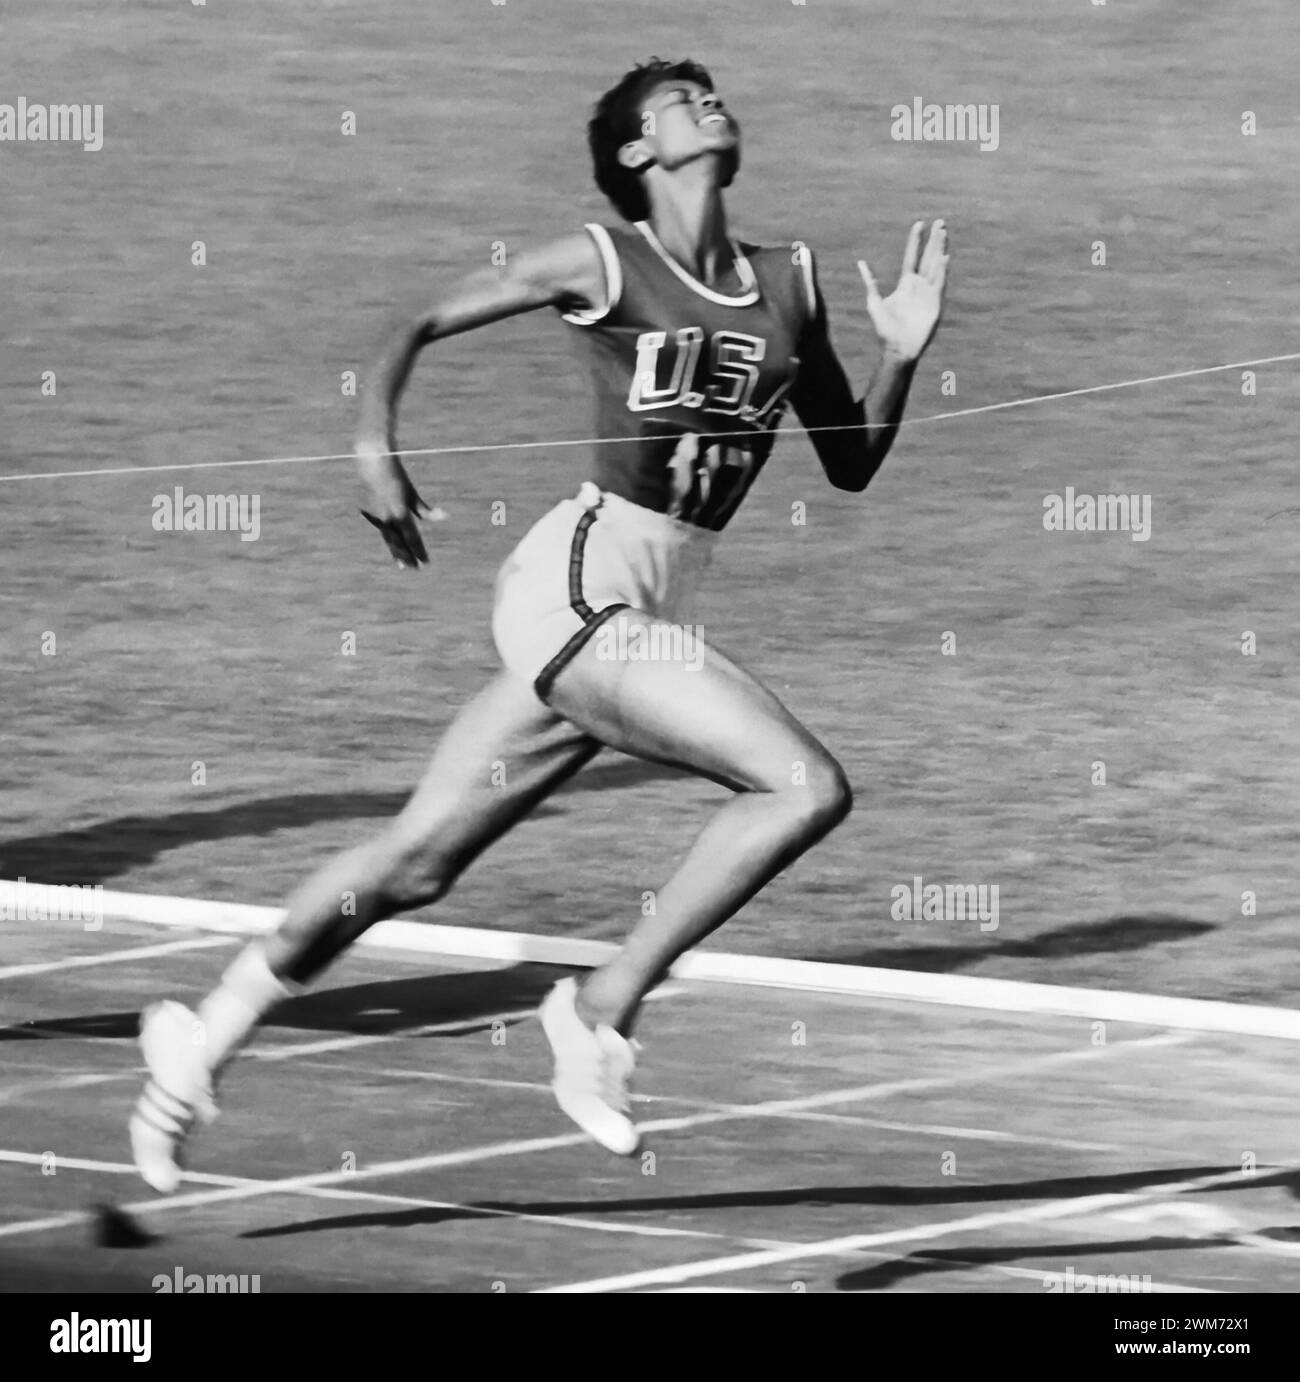 Wilma Rudolph. The U.S sprinter, Wilma Glodean Rudolph (1940-1994) winning the 100 metres race at the 1960 Olympics. Stock Photo